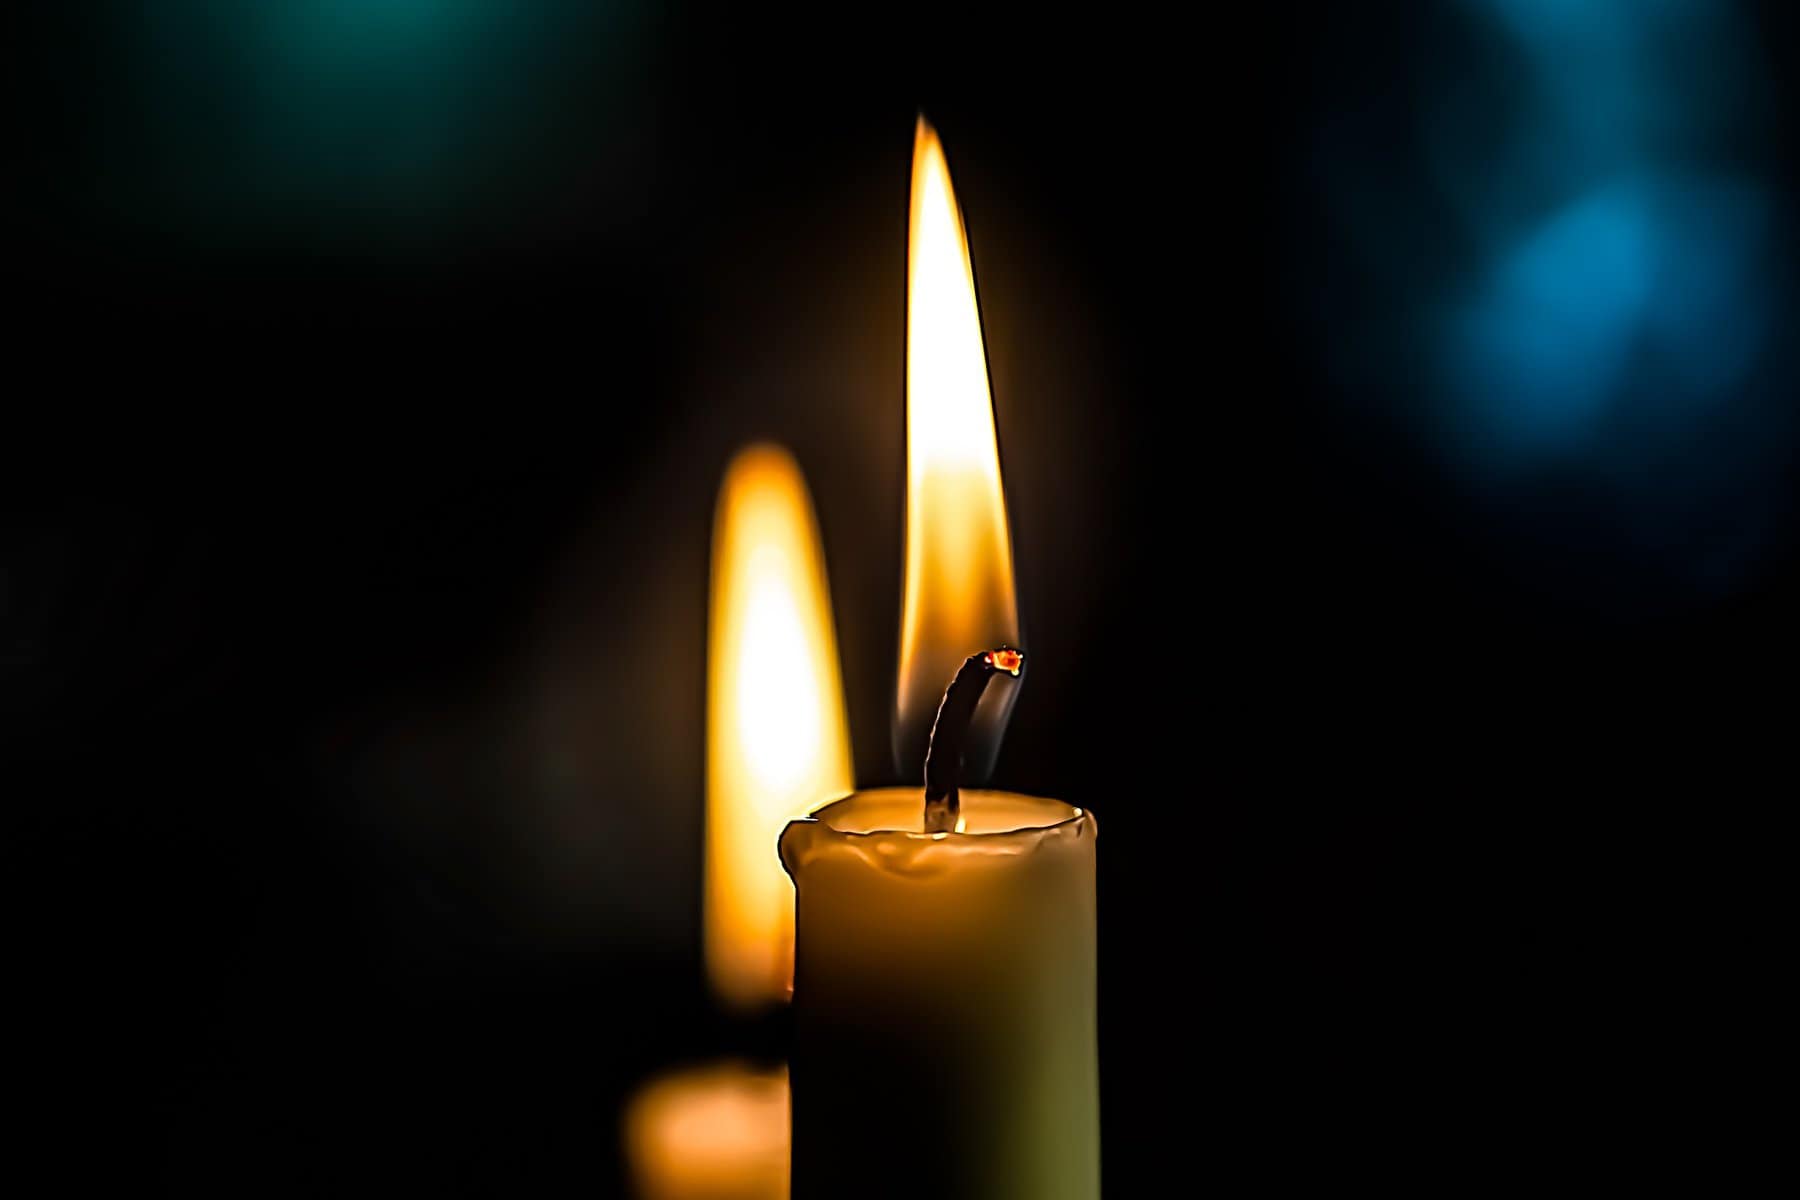 A tapered candle is shown lit with another behind it and lower.